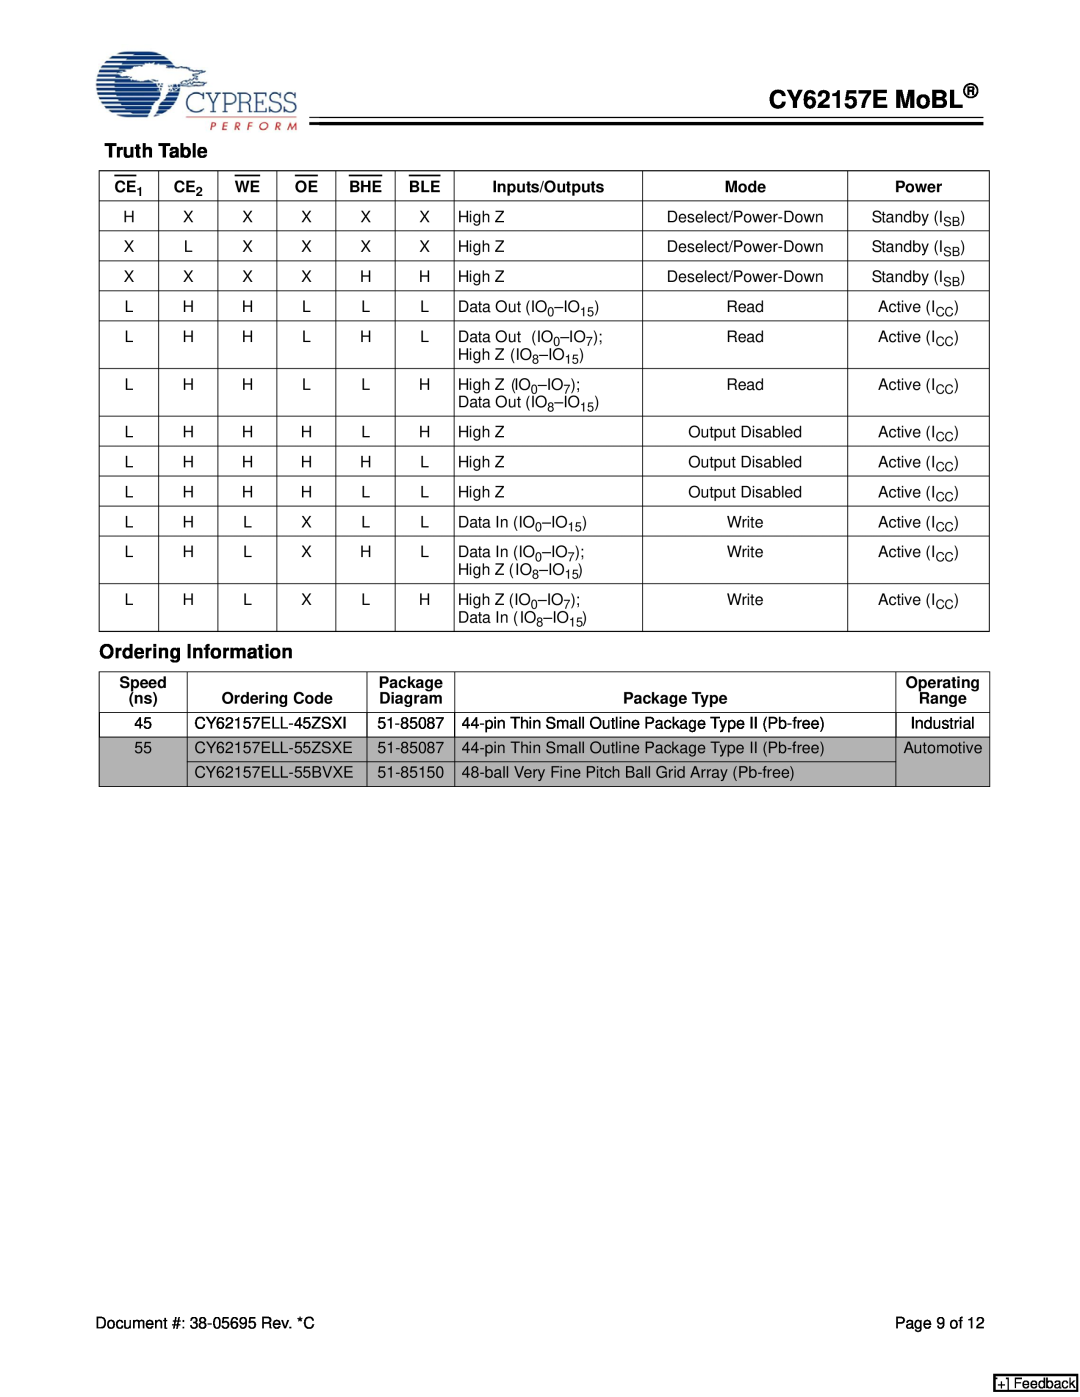 Cypress manual Truth Table, Ordering Information, CY62157E MoBL 